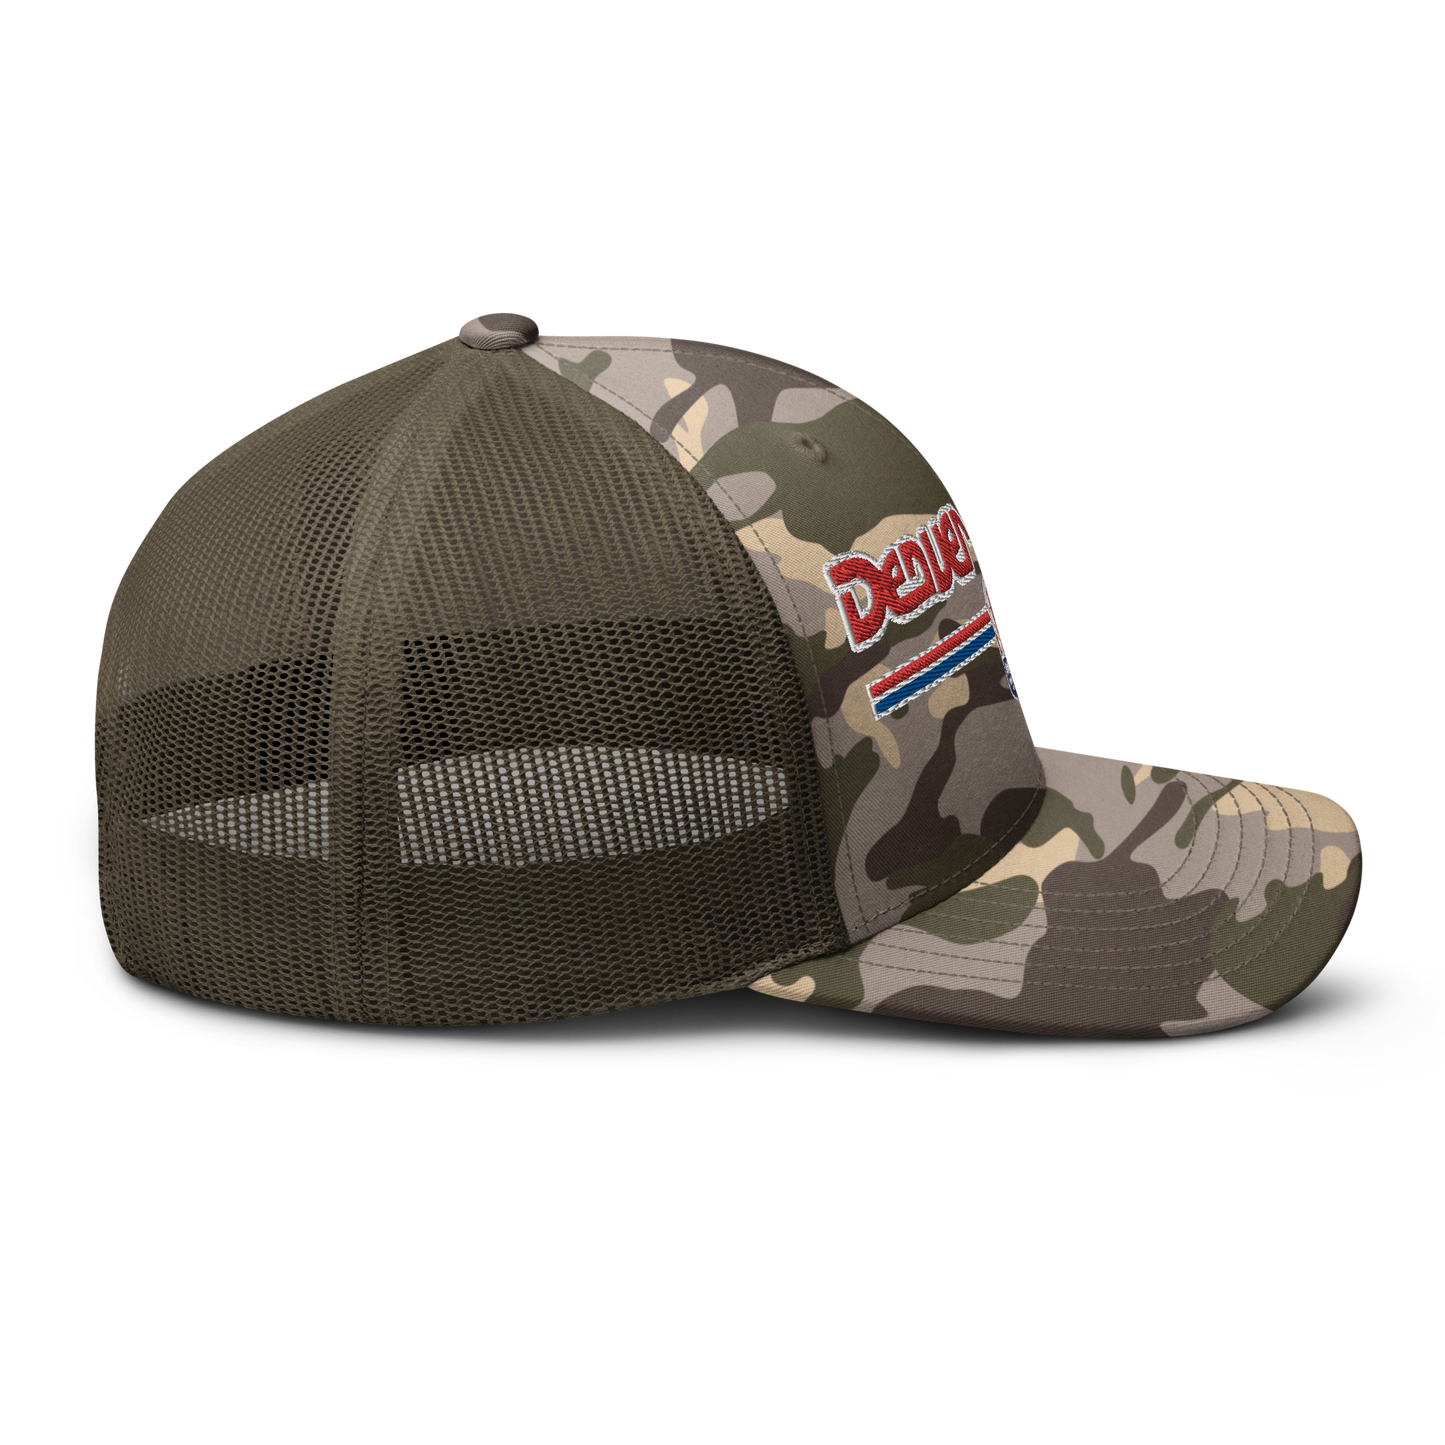 Introducing the Denver Nuggets Camo Hat - Celebrating their First NBA Championship!